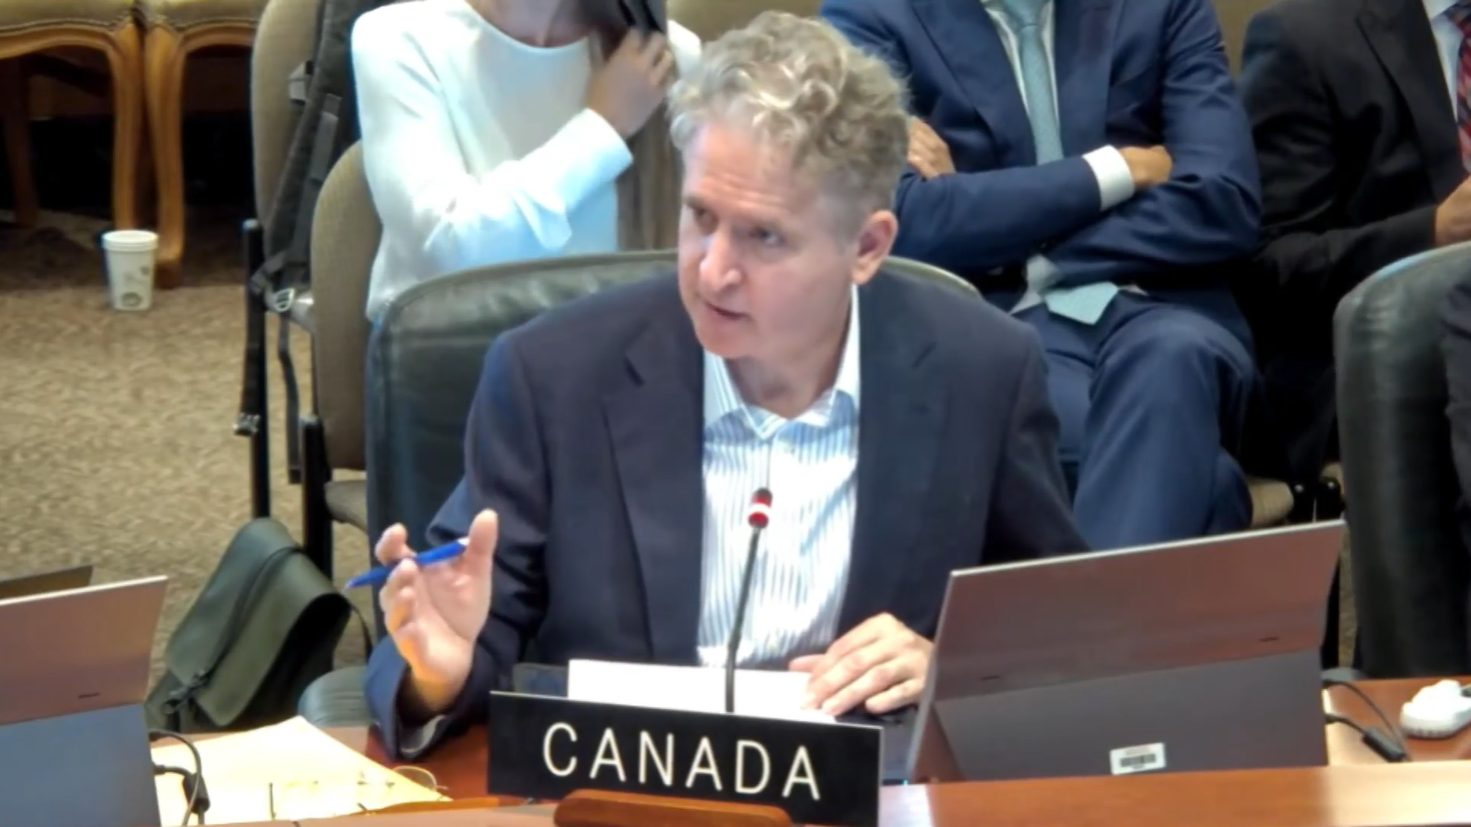 Canada highlights the Executive’s commitment to a peaceful transition